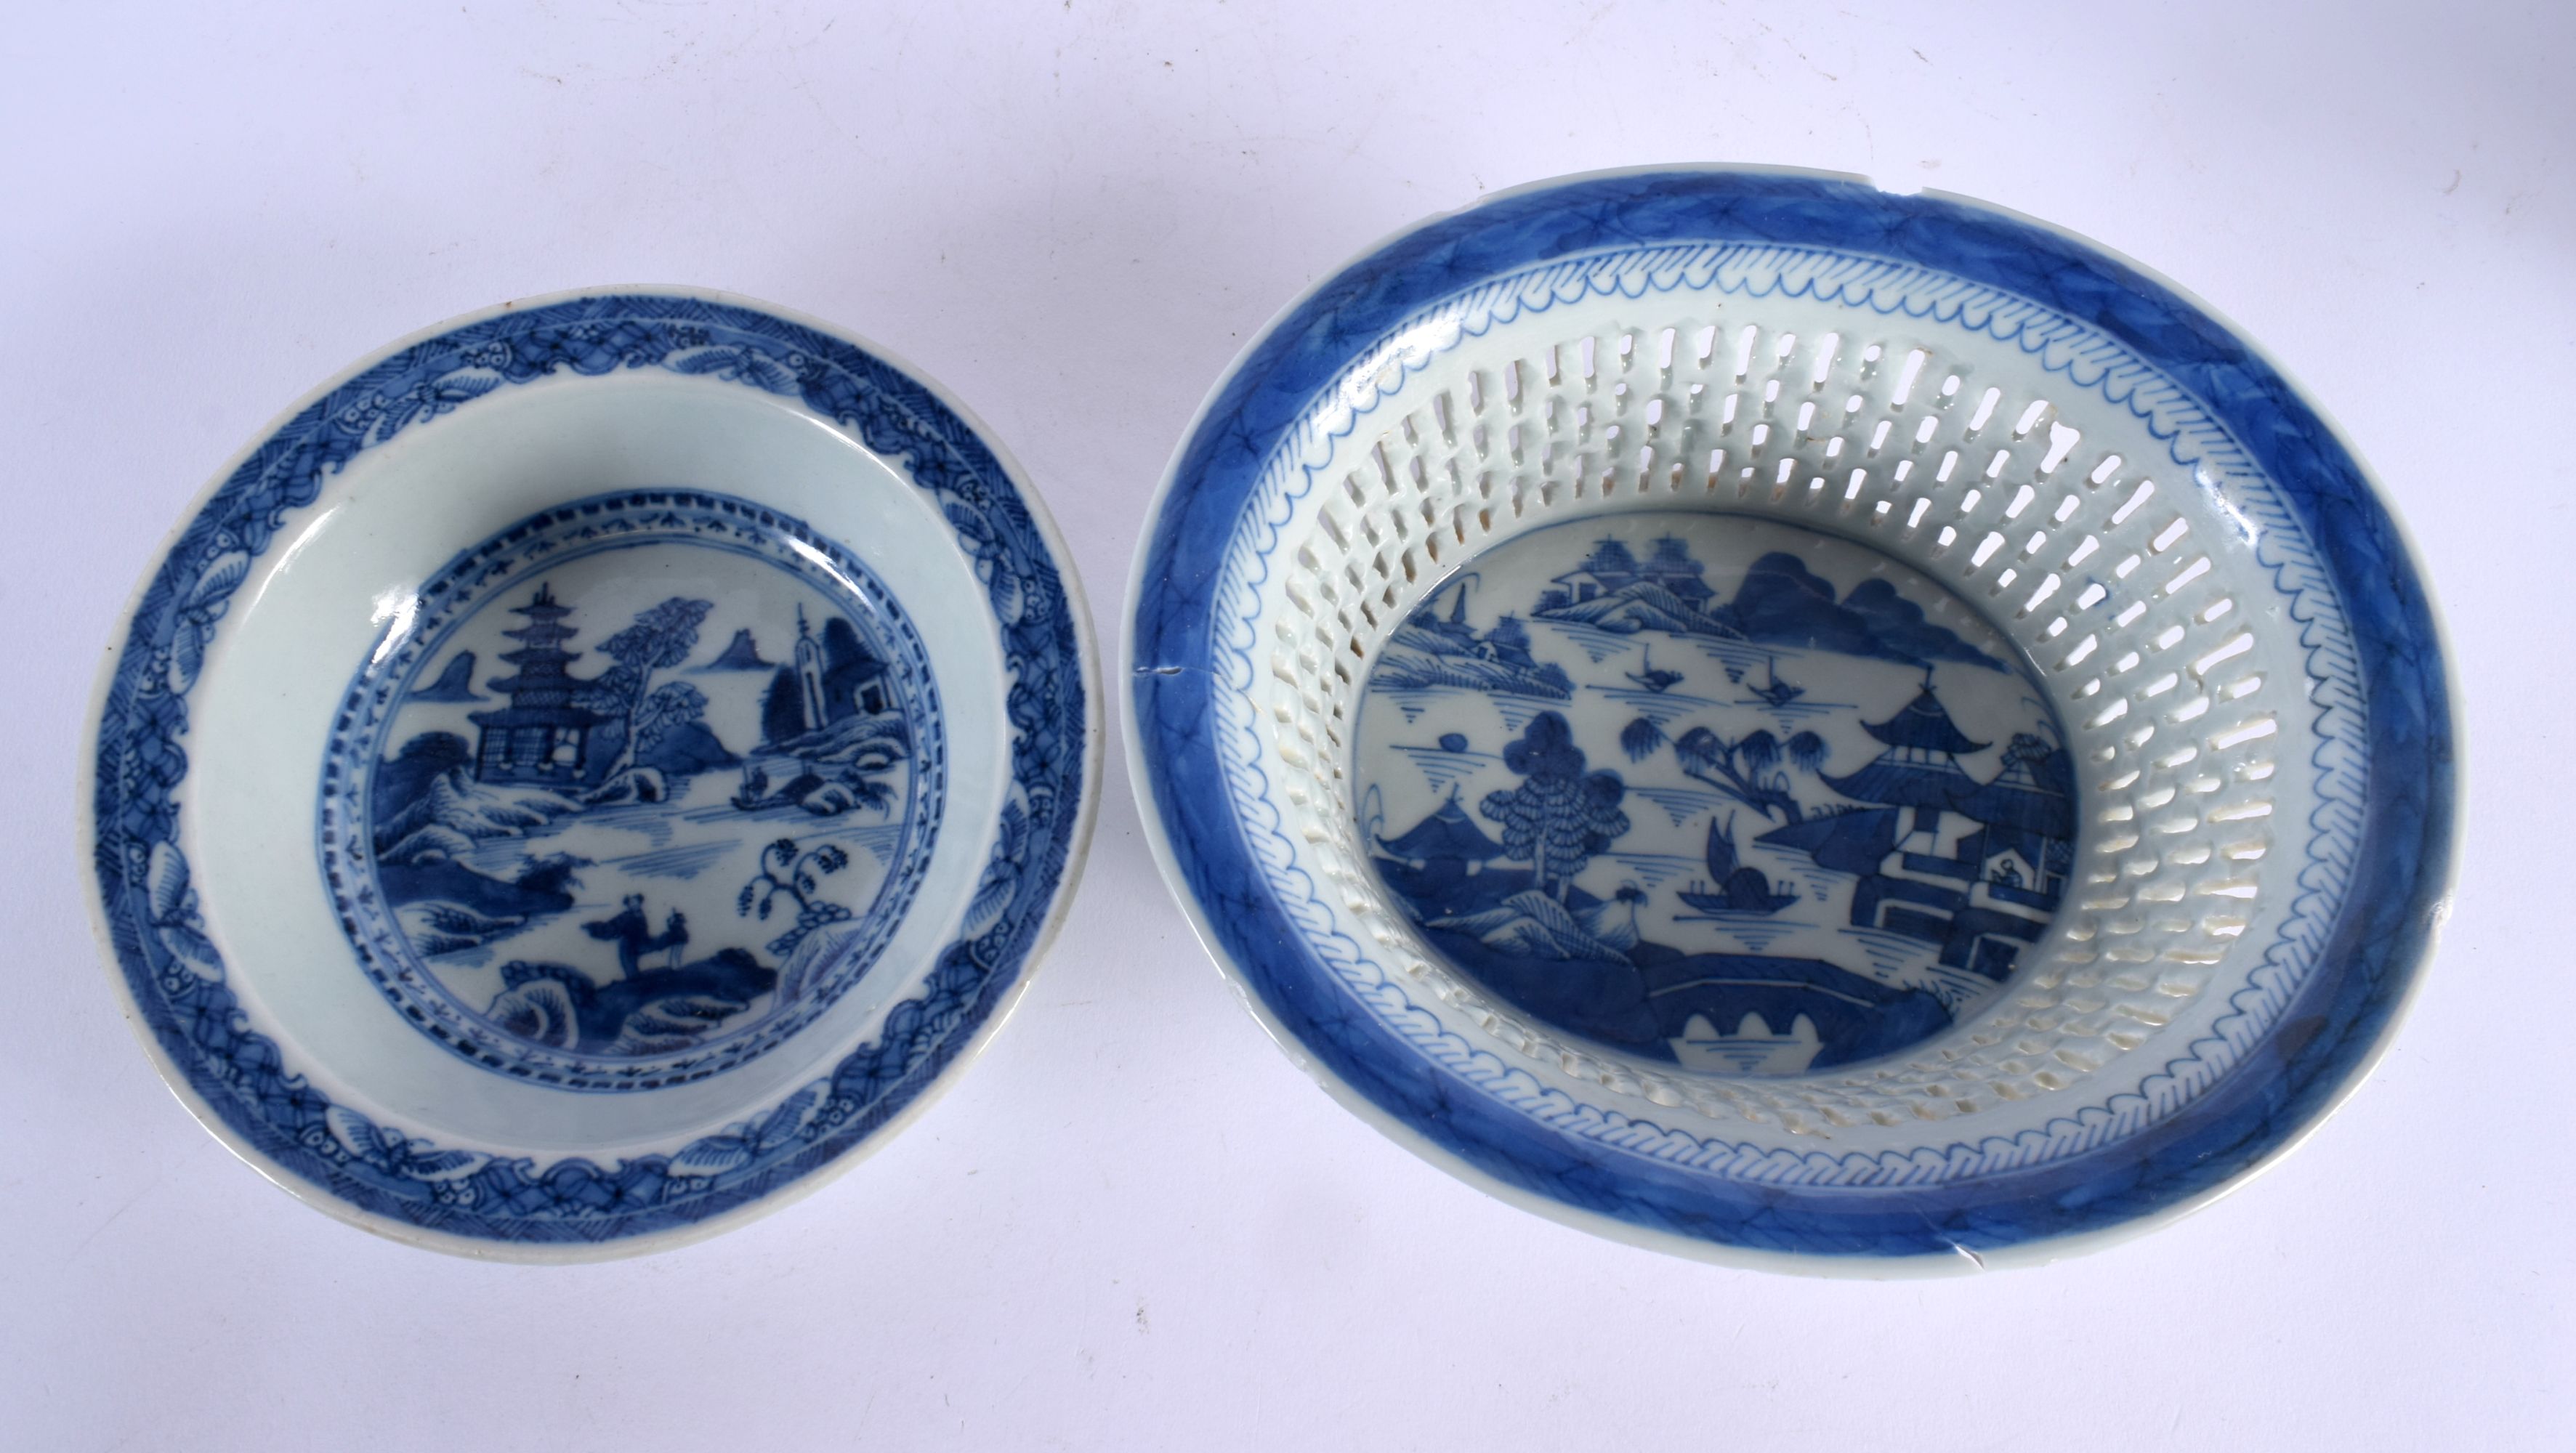 A LARGE 18TH CENTURY CHINESE EXPORT BLUE AND WHITE PORCELAIN DISH together with a basket & pudding b - Image 5 of 6